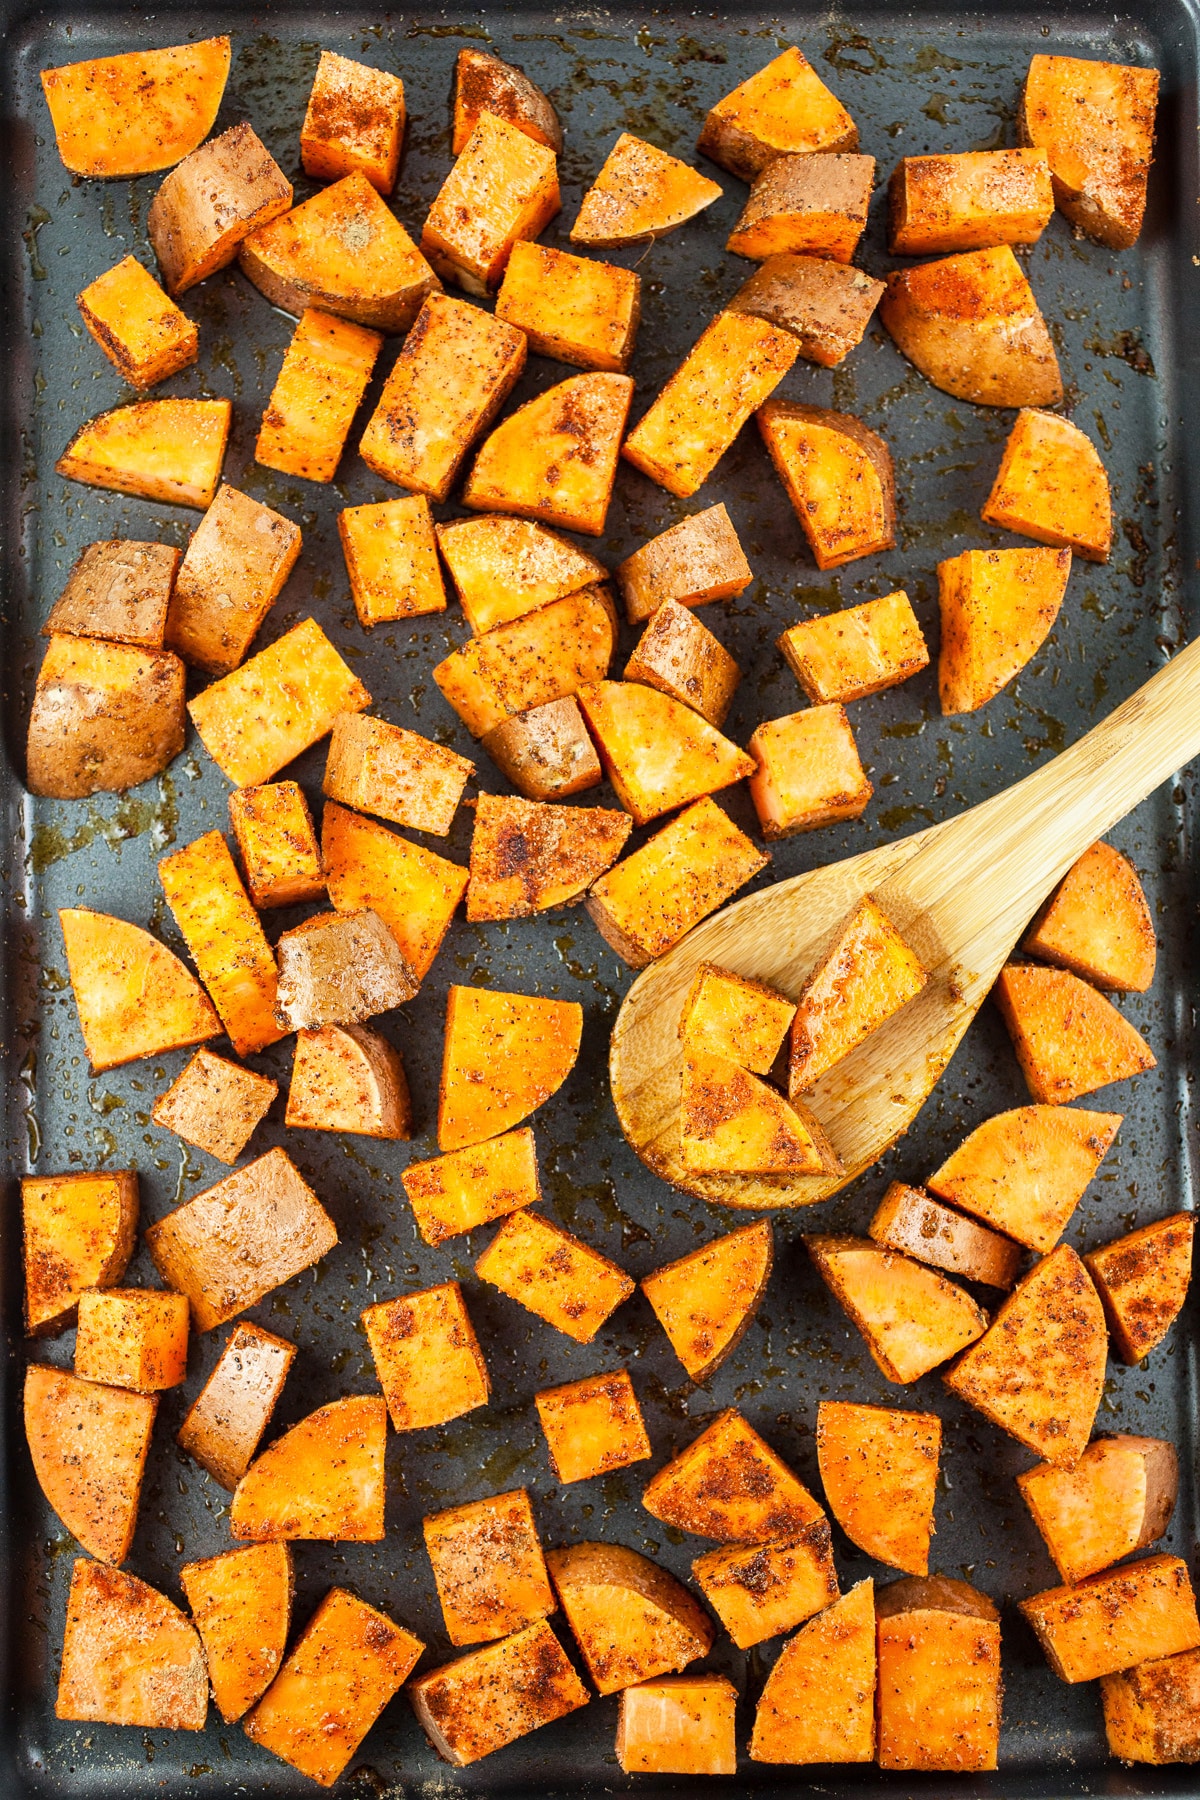 Uncooked diced sweet potatoes tossed in olive oil and spices on baking sheet.